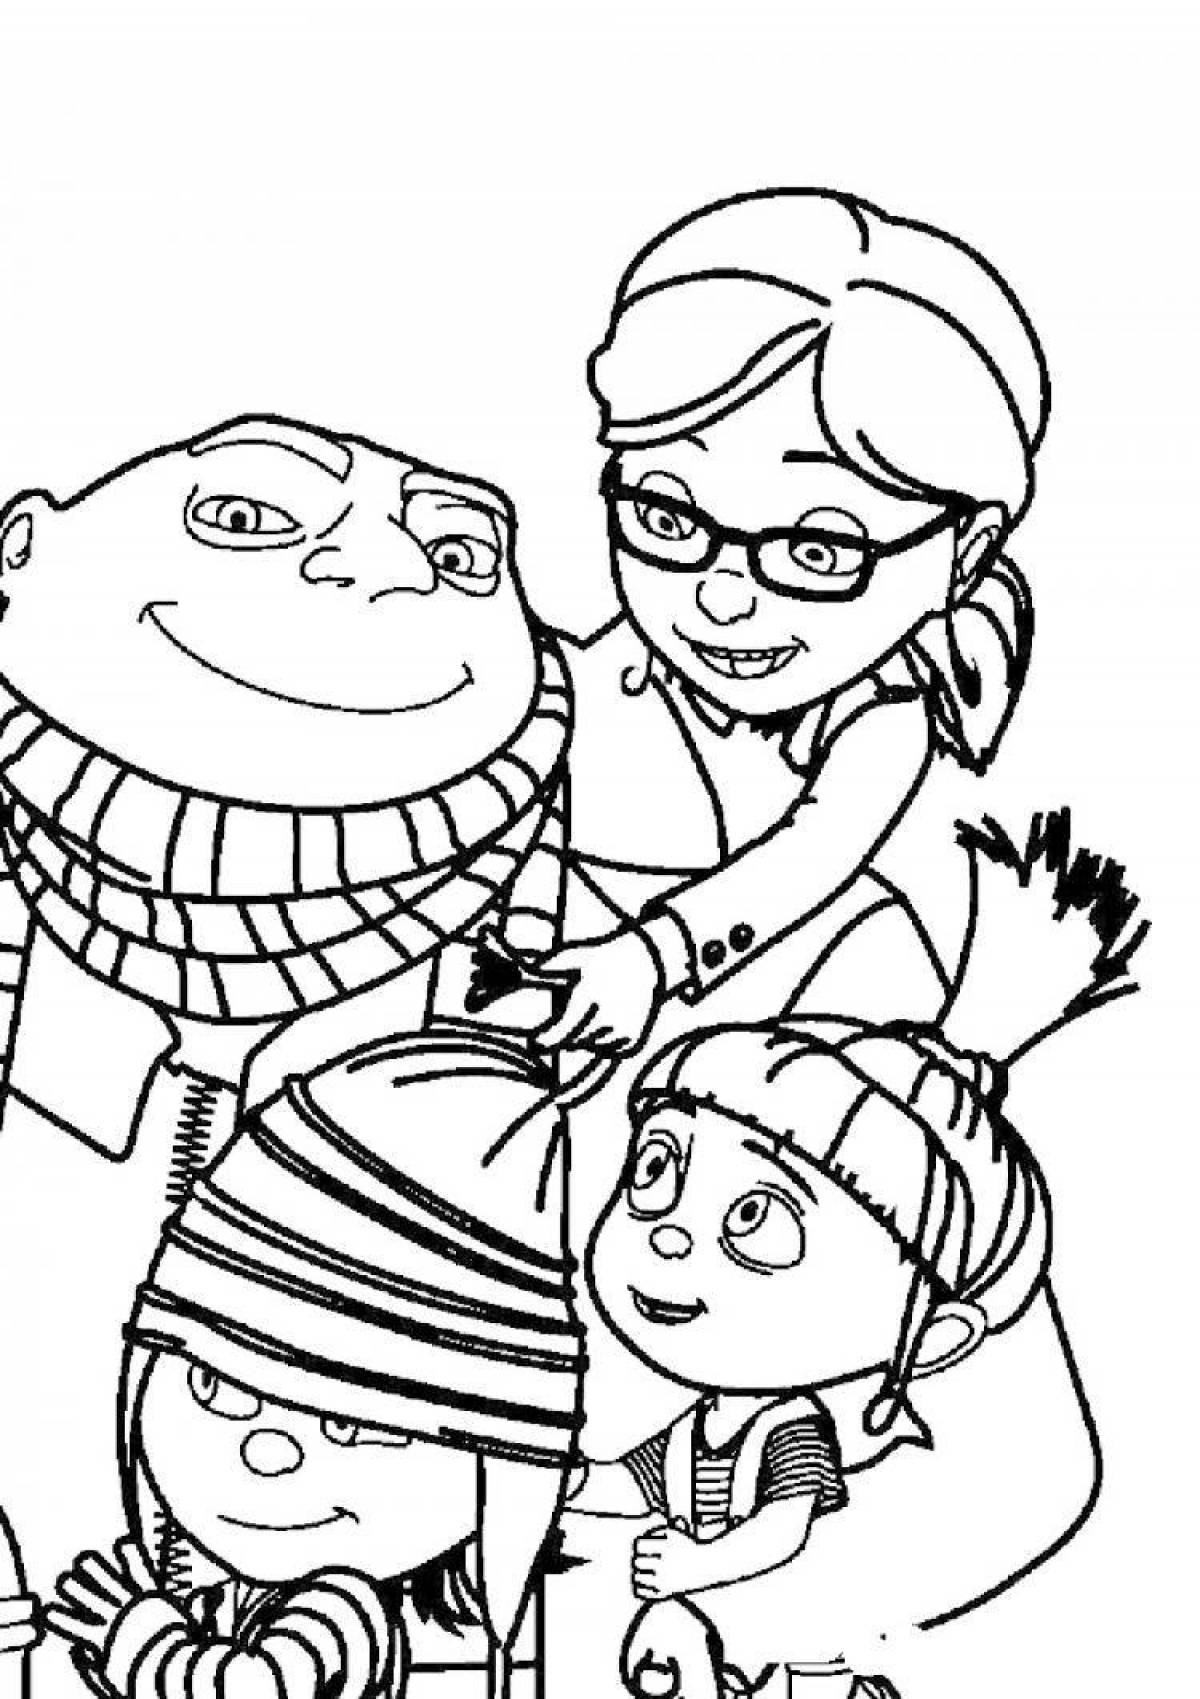 Agnes glowing coloring book